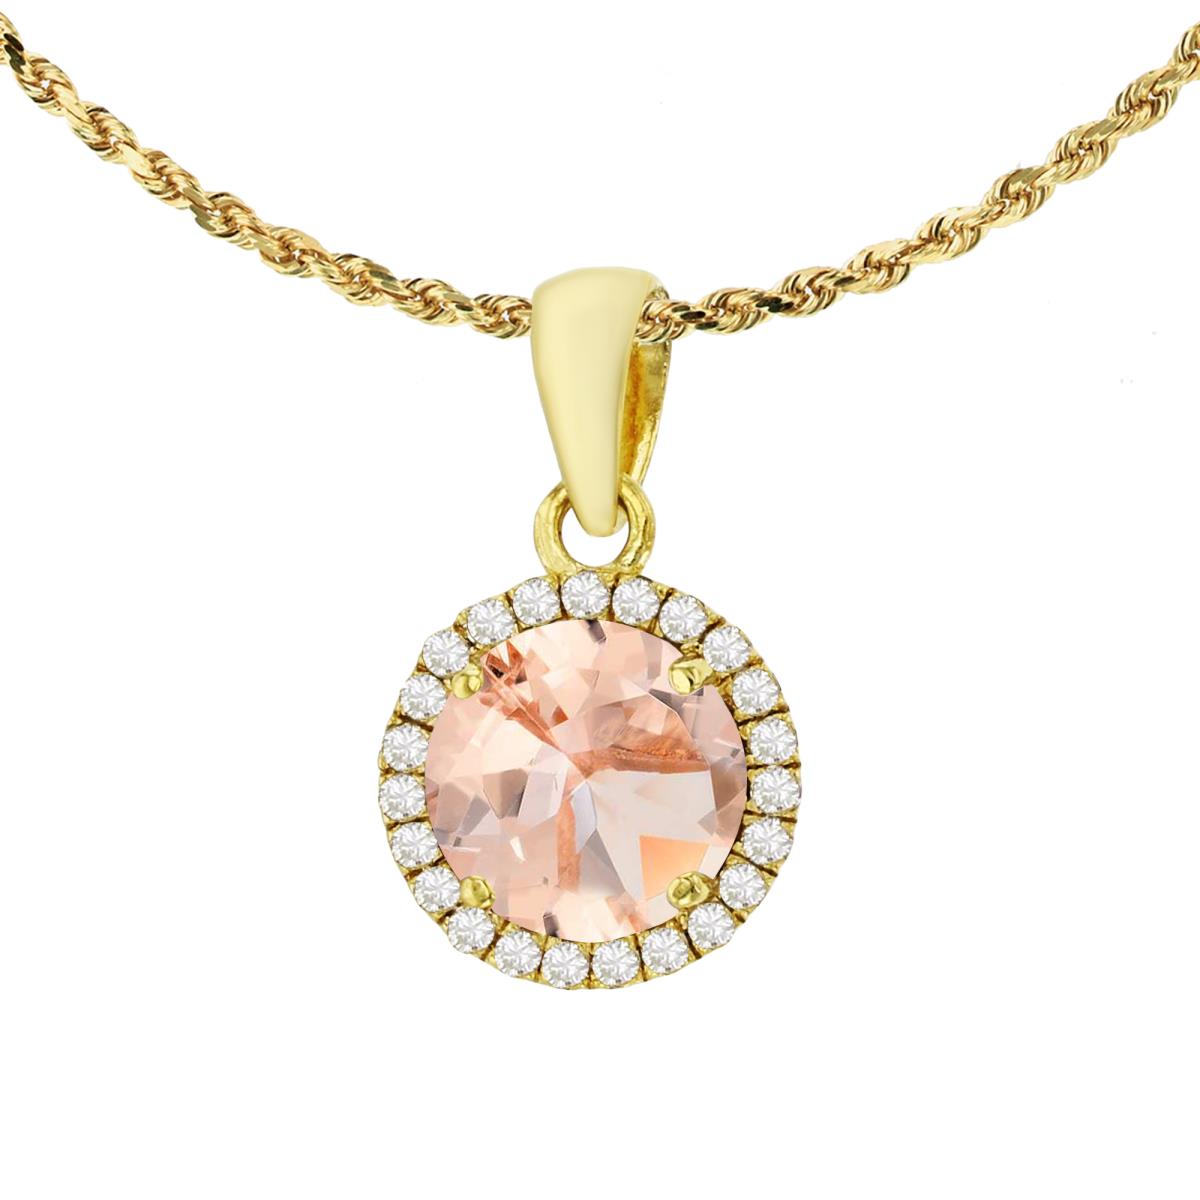 10K Yellow Gold 7mm Round Morganite & 0.12 CTTW Diamond Halo 18" Rope Chain Necklace